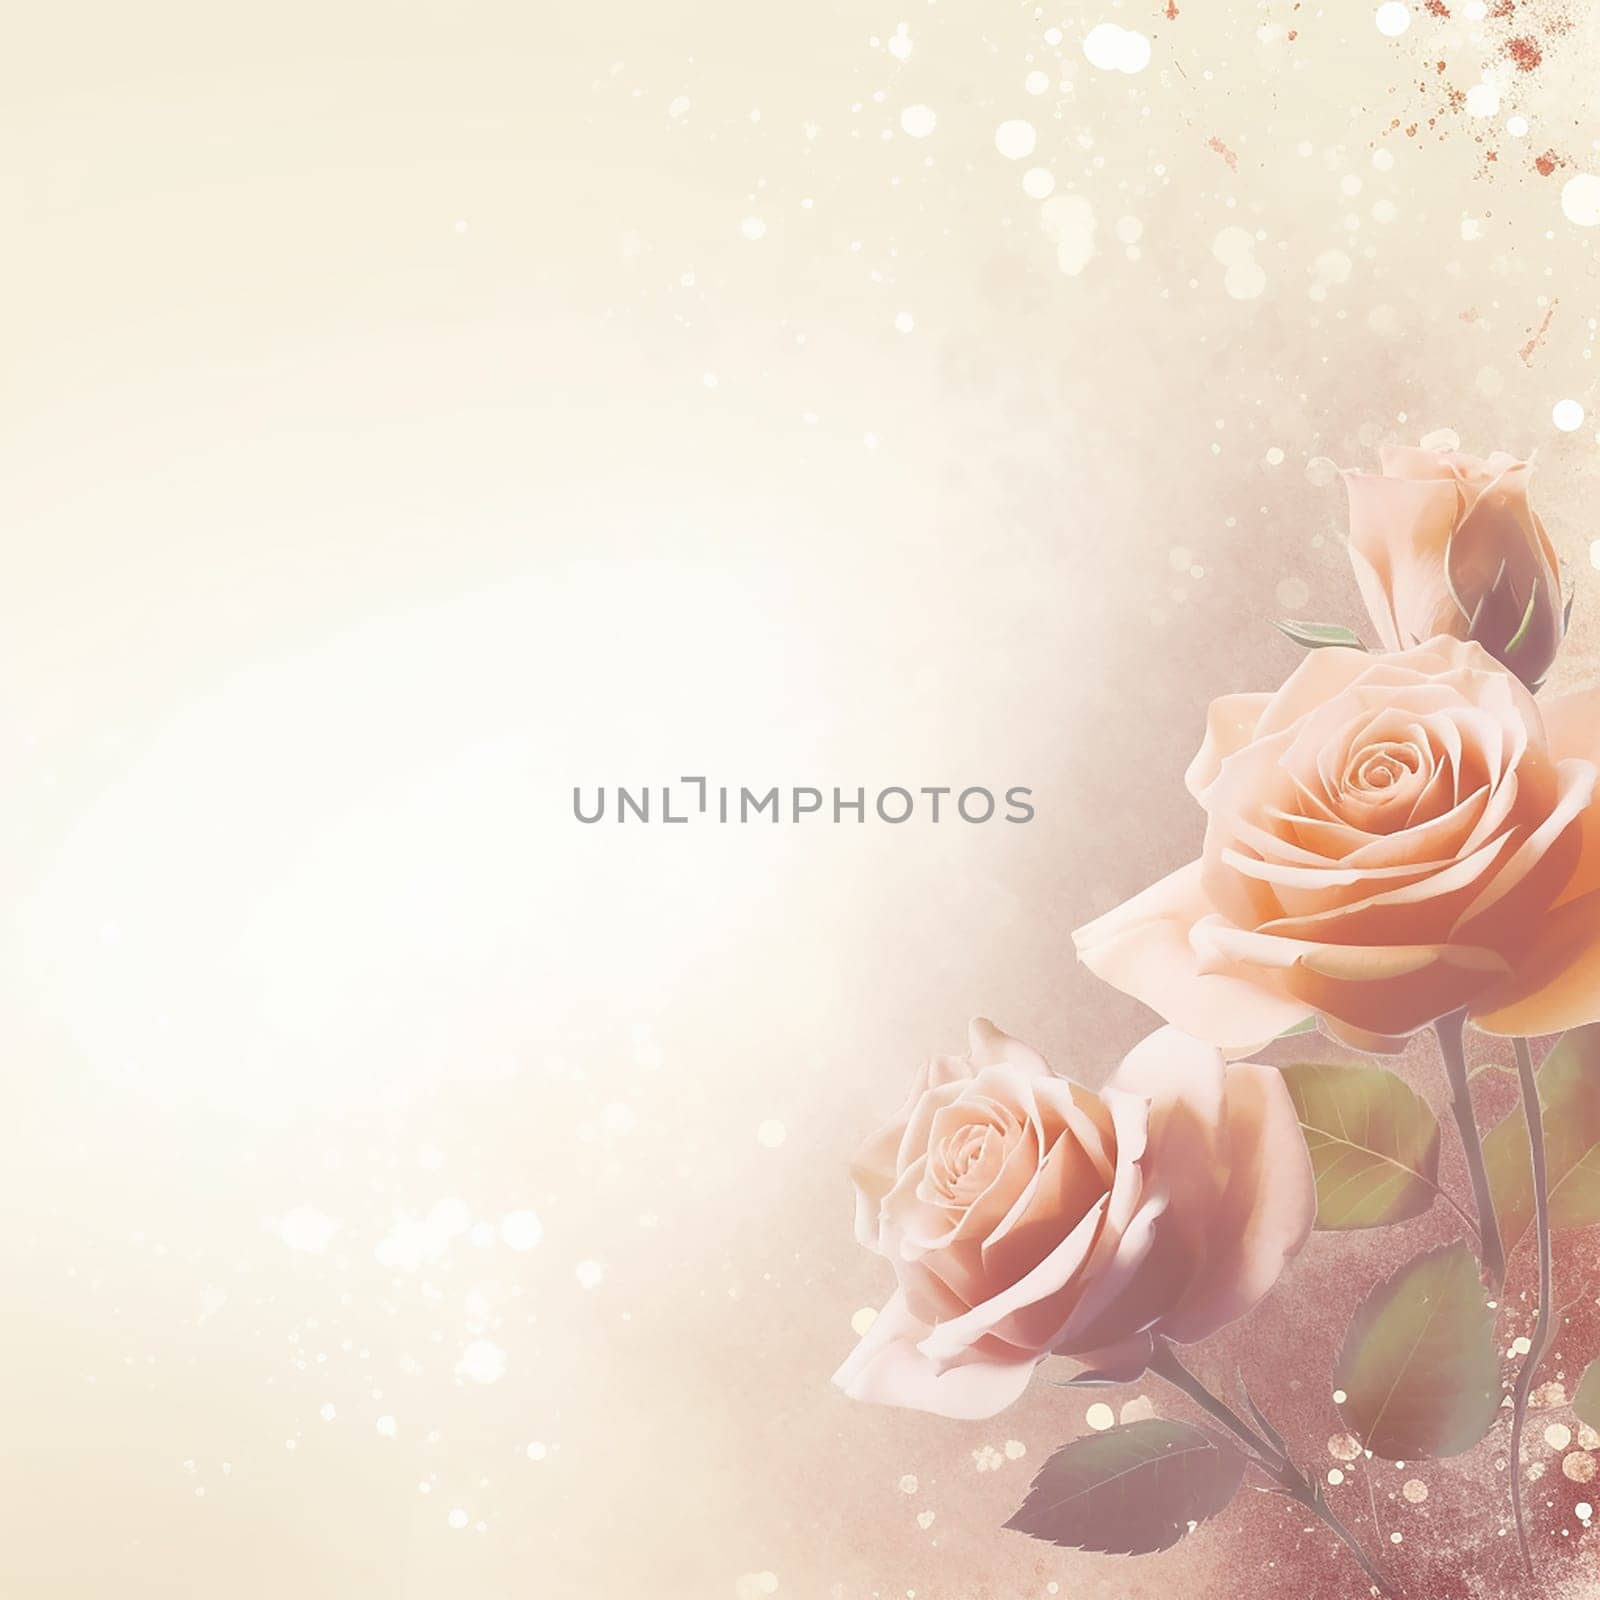 Elegant pale roses with sparkles on a soft cream background. by Hype2art